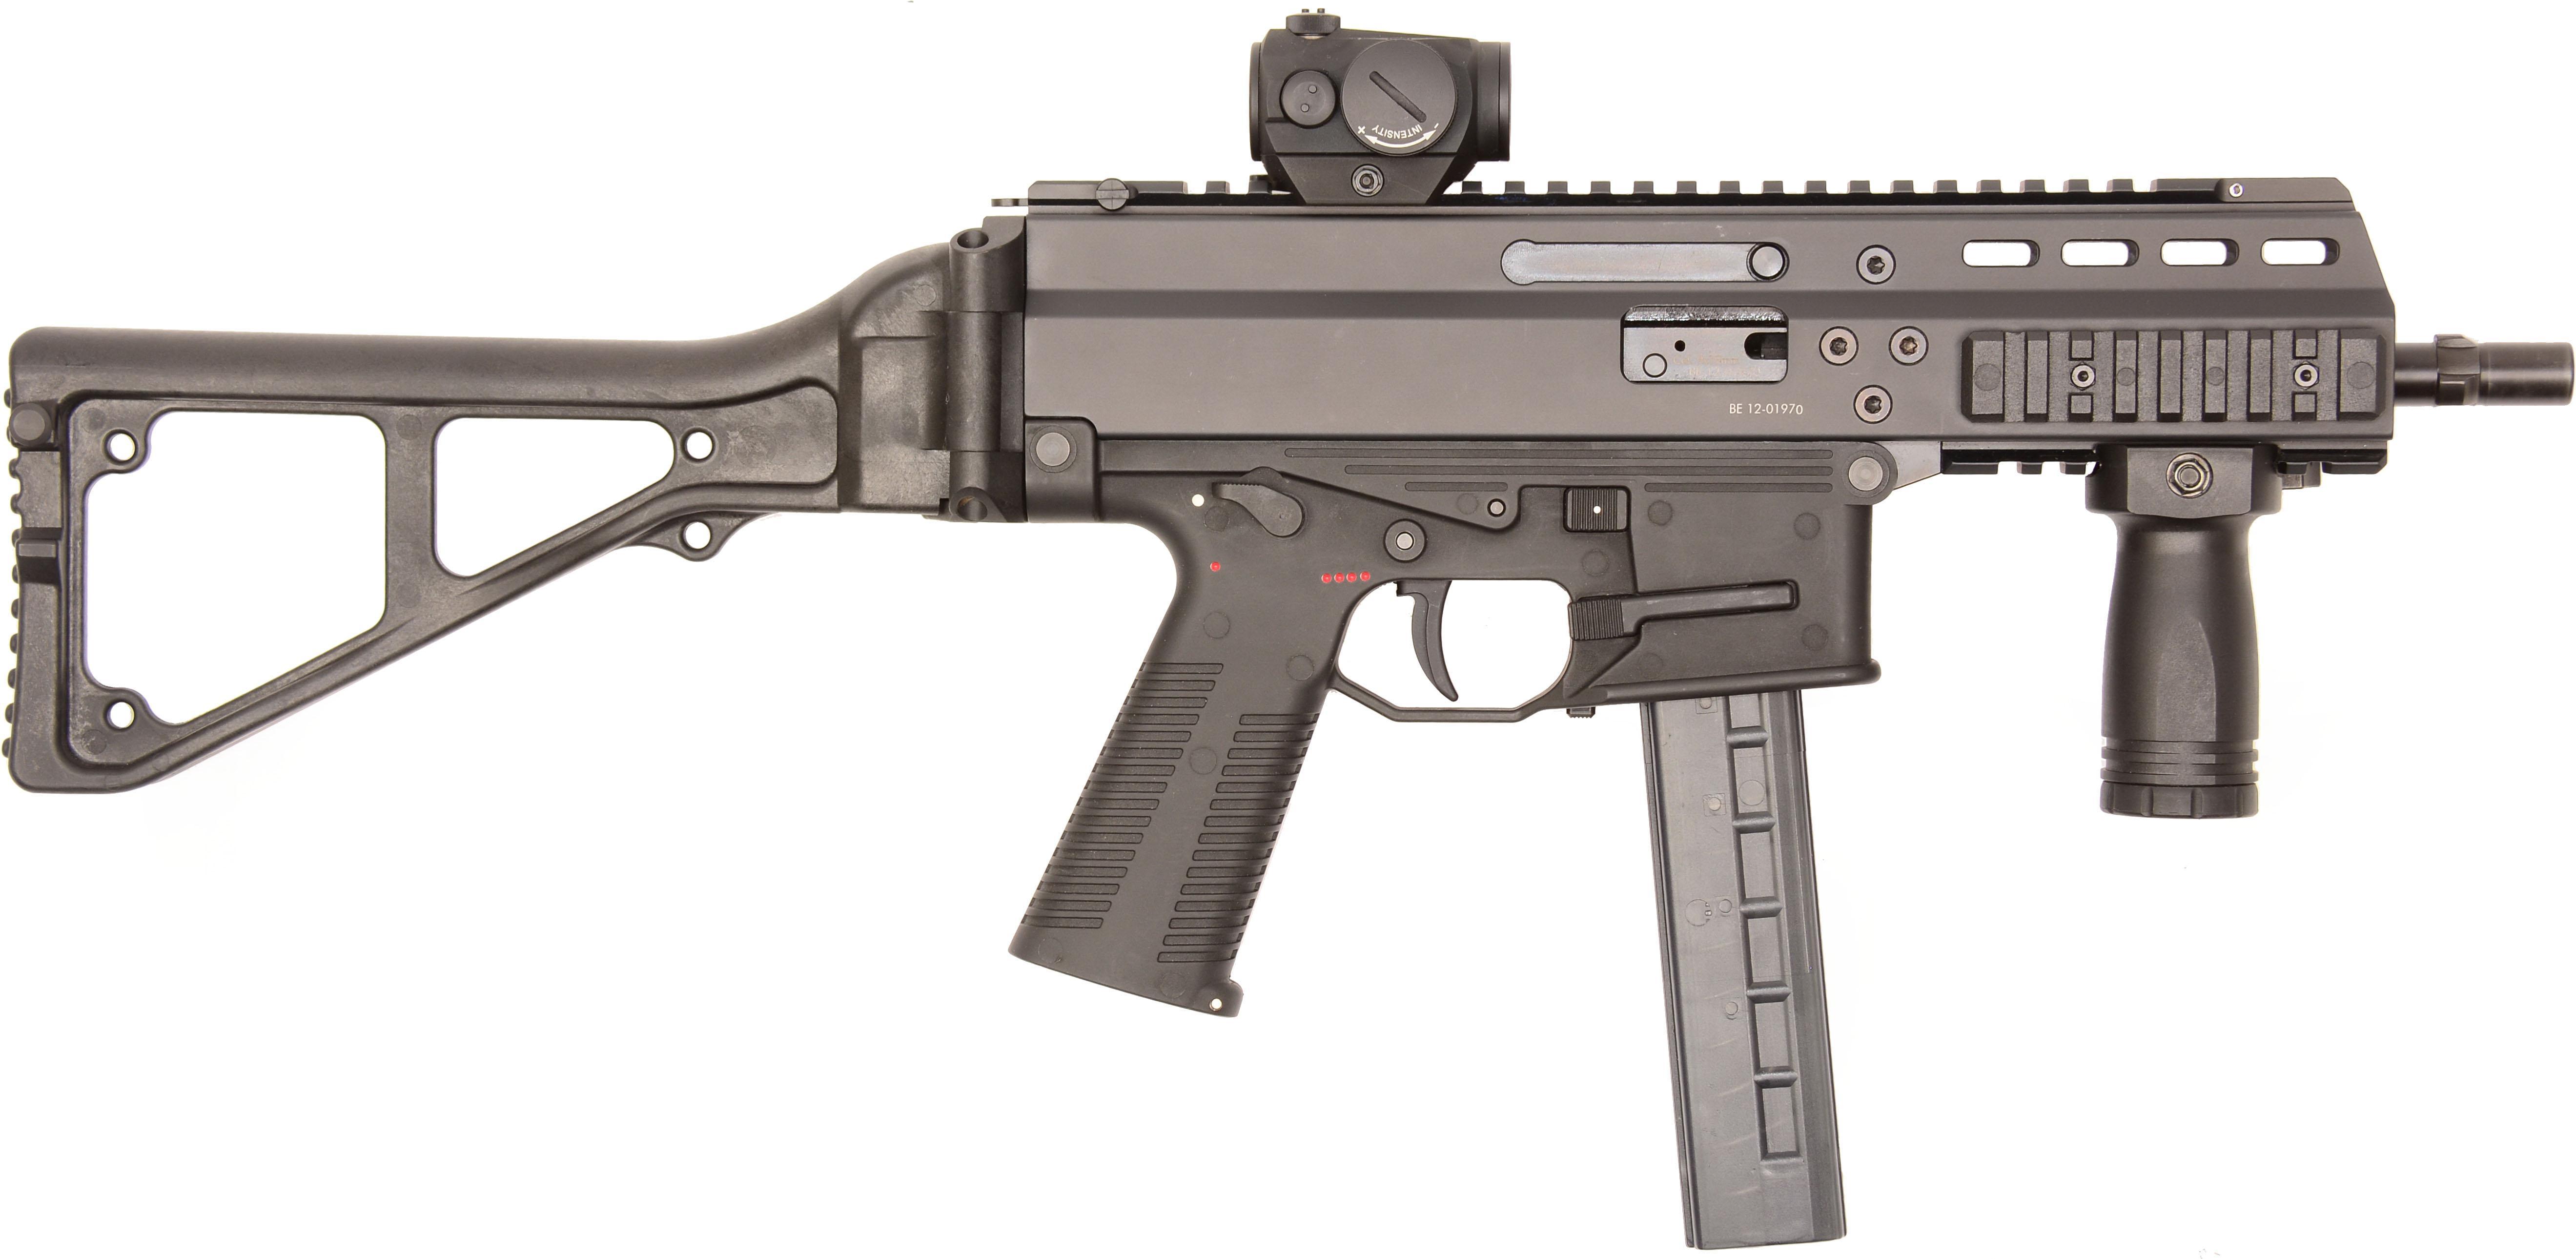 The Army picked this sub gun for security to use while protecting top commanders and leaders